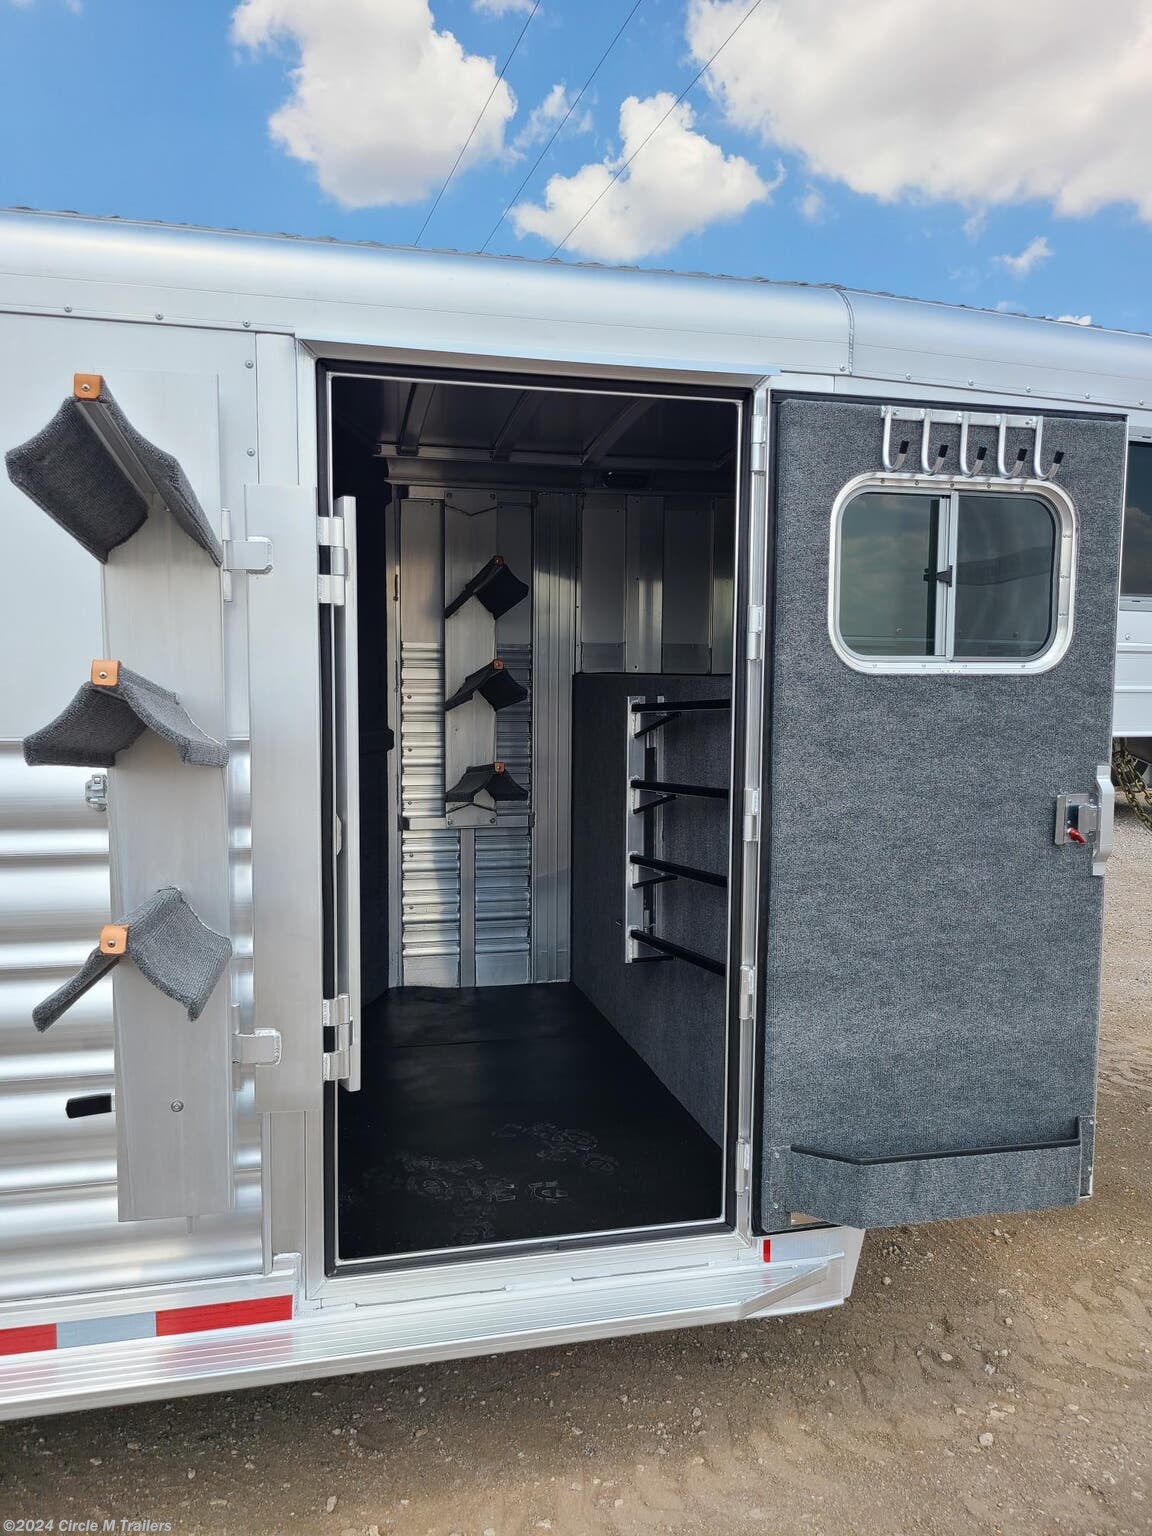 Horse Trailers In Stock